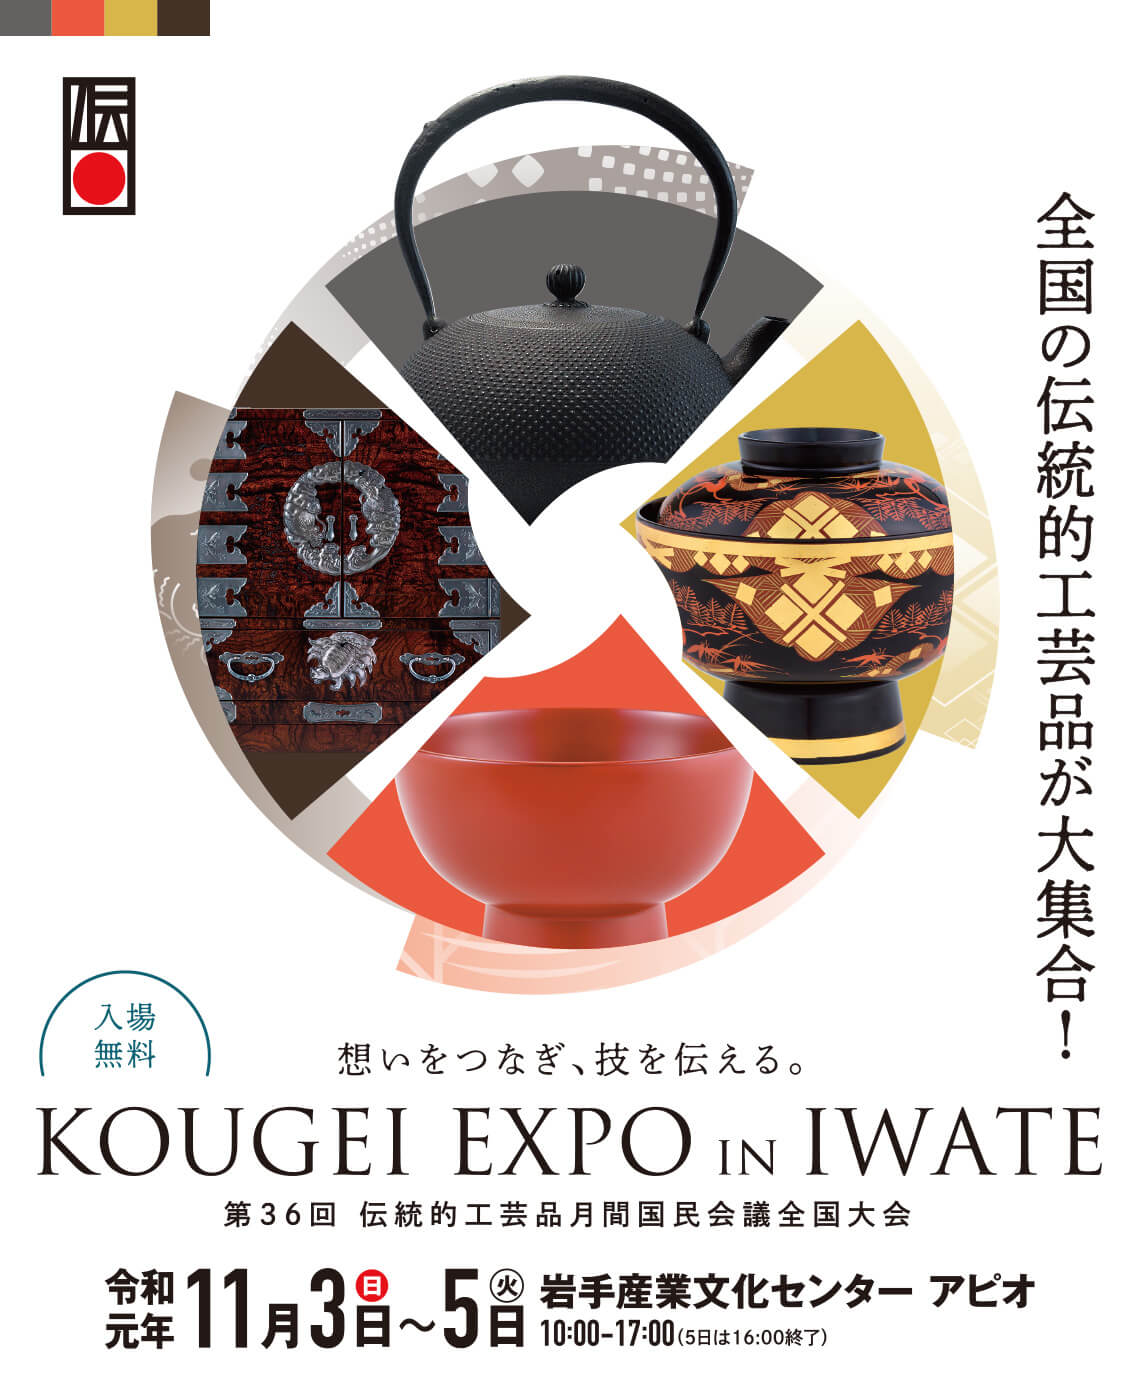 KOUGEI EXPO in IWATE